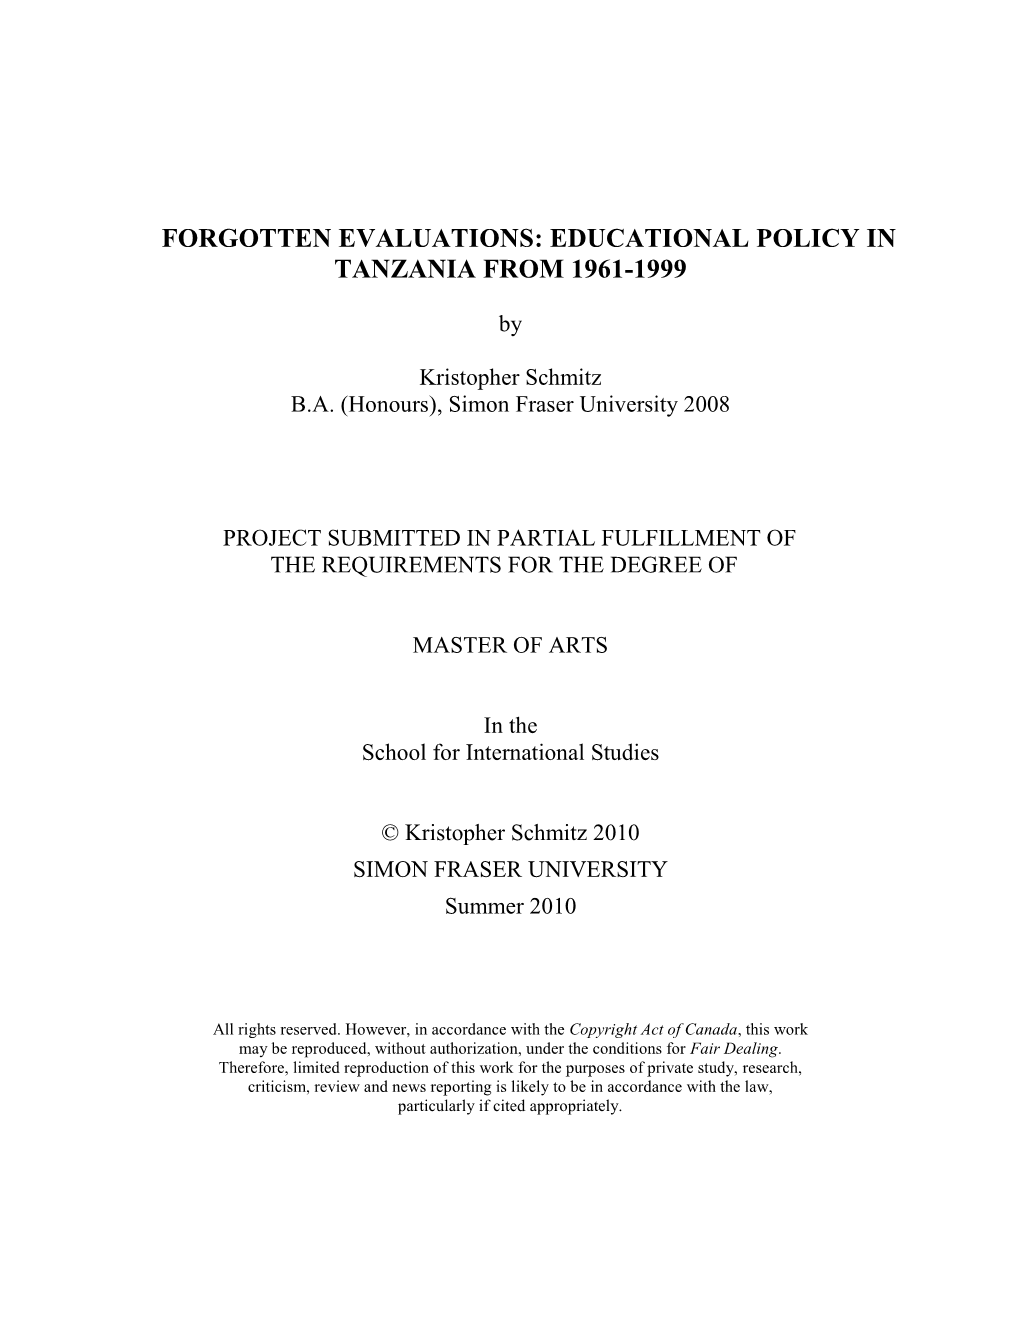 Forgotten Evaluations: Education Policy in Tanzania from 1961-1999